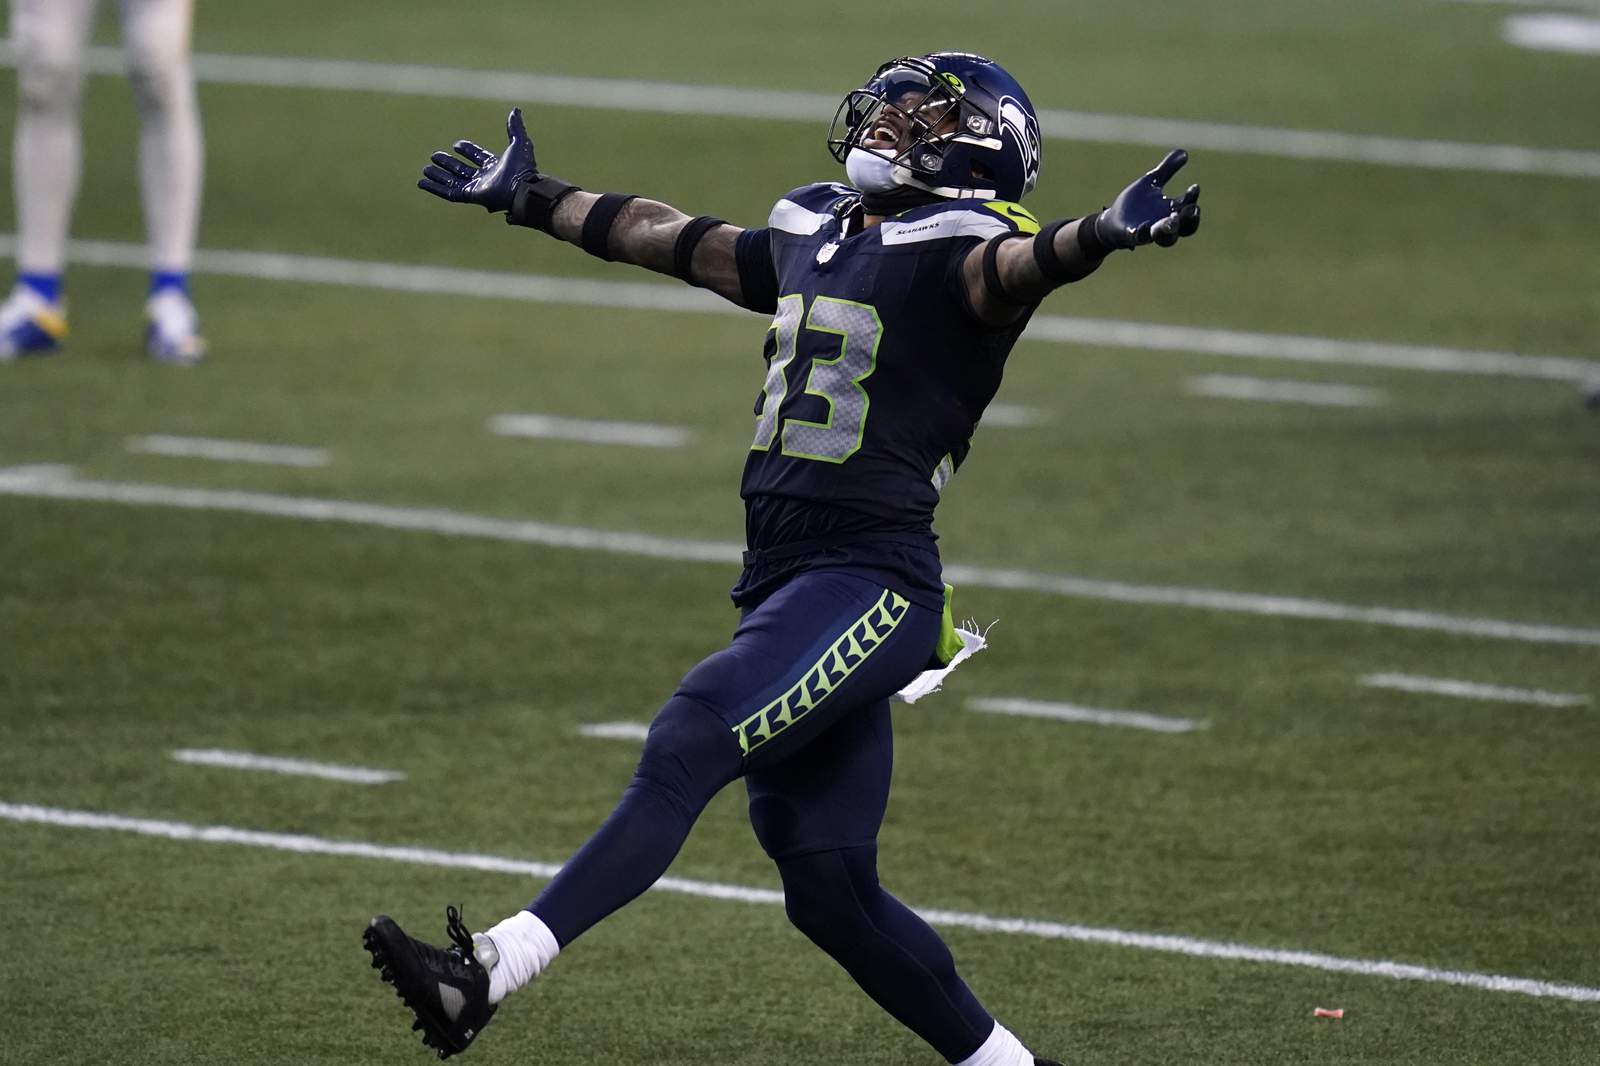 Seahawks wrap up NFC West title with 20-9 win over Rams